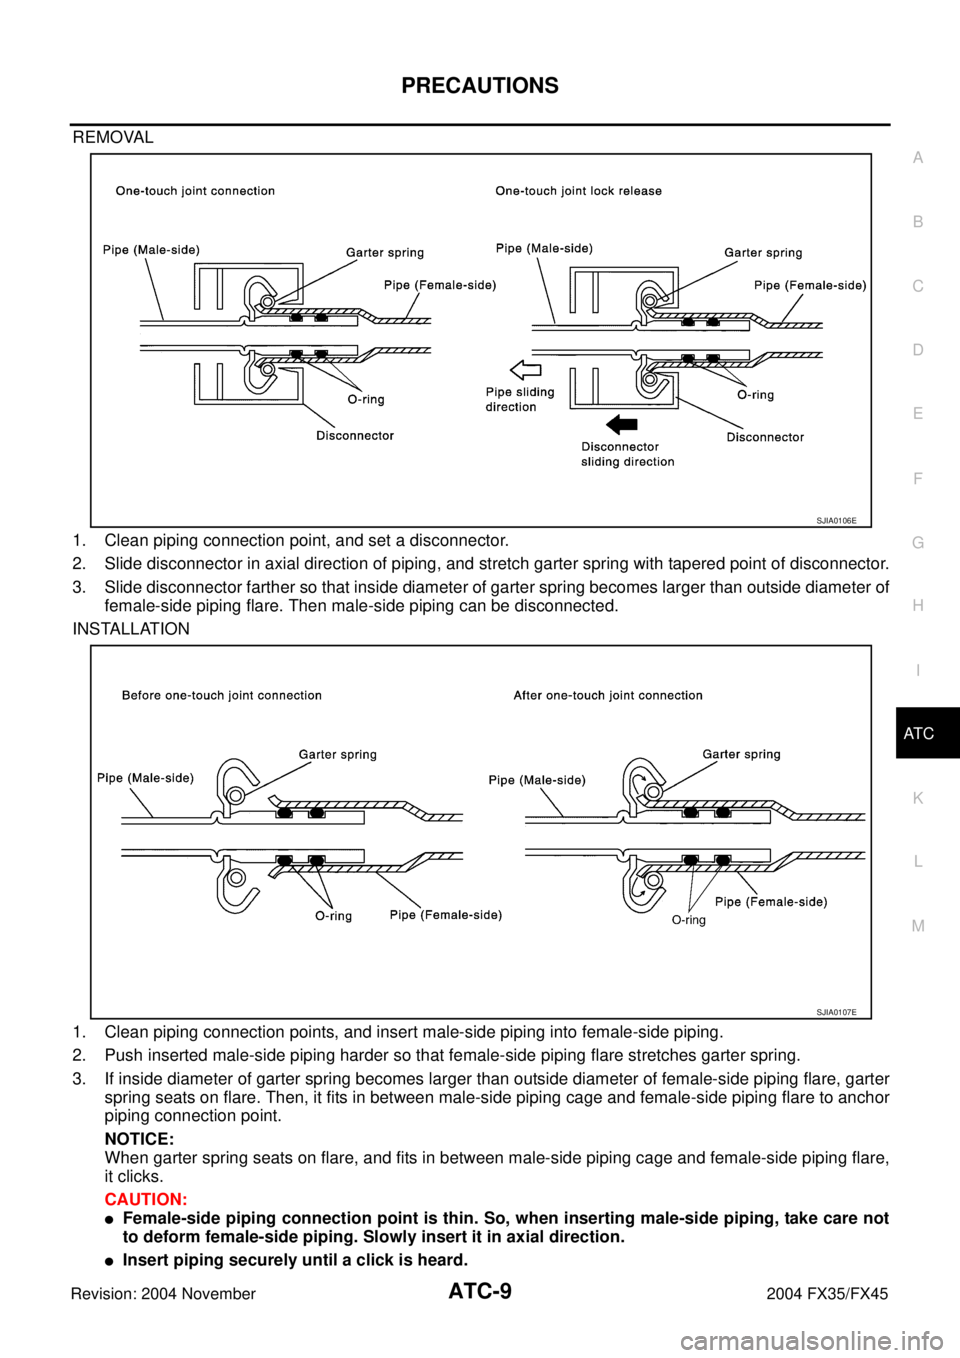 INFINITI FX35 2004  Service Manual PRECAUTIONS
ATC-9
C
D
E
F
G
H
I
K
L
MA
B
AT C
Revision: 2004 November 2004 FX35/FX45
REMOVAL
1. Clean piping connection point, and set a disconnector.
2. Slide disconnector in axial direction of pipin